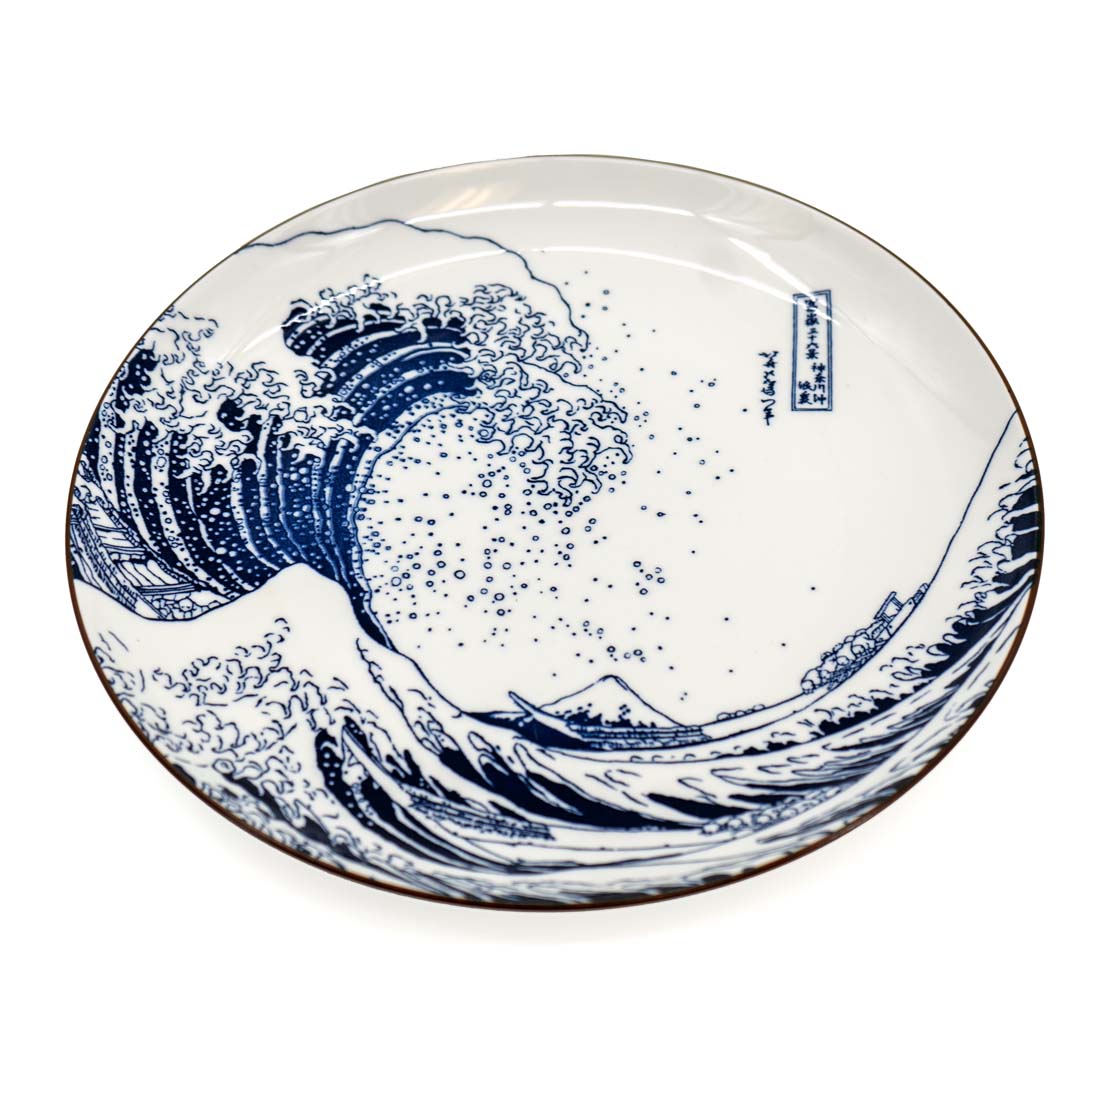 The Great Wave Ceramic Plate